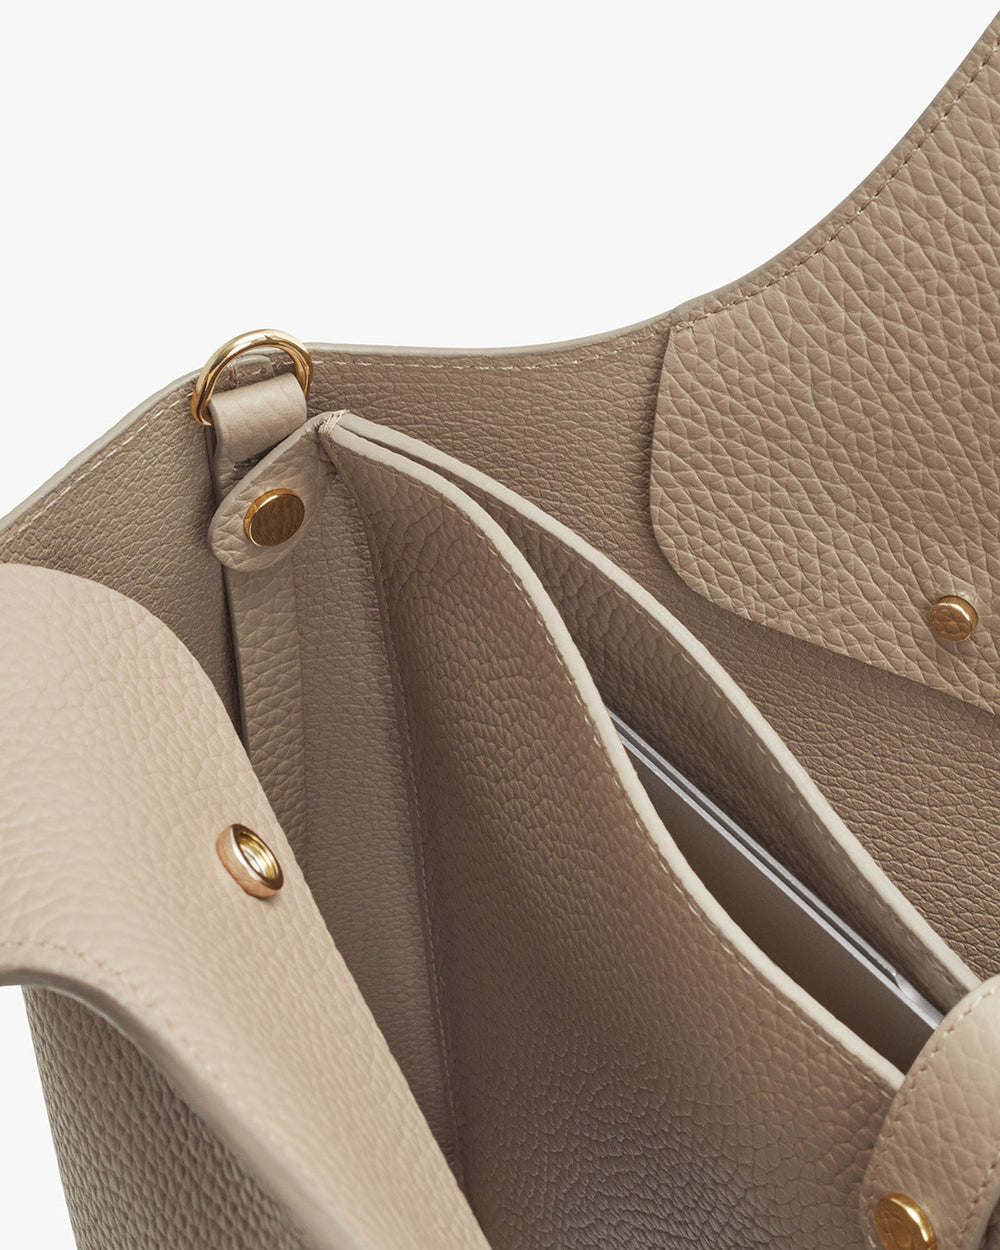 Close-up view of an open handbag showing interior and fastener details.